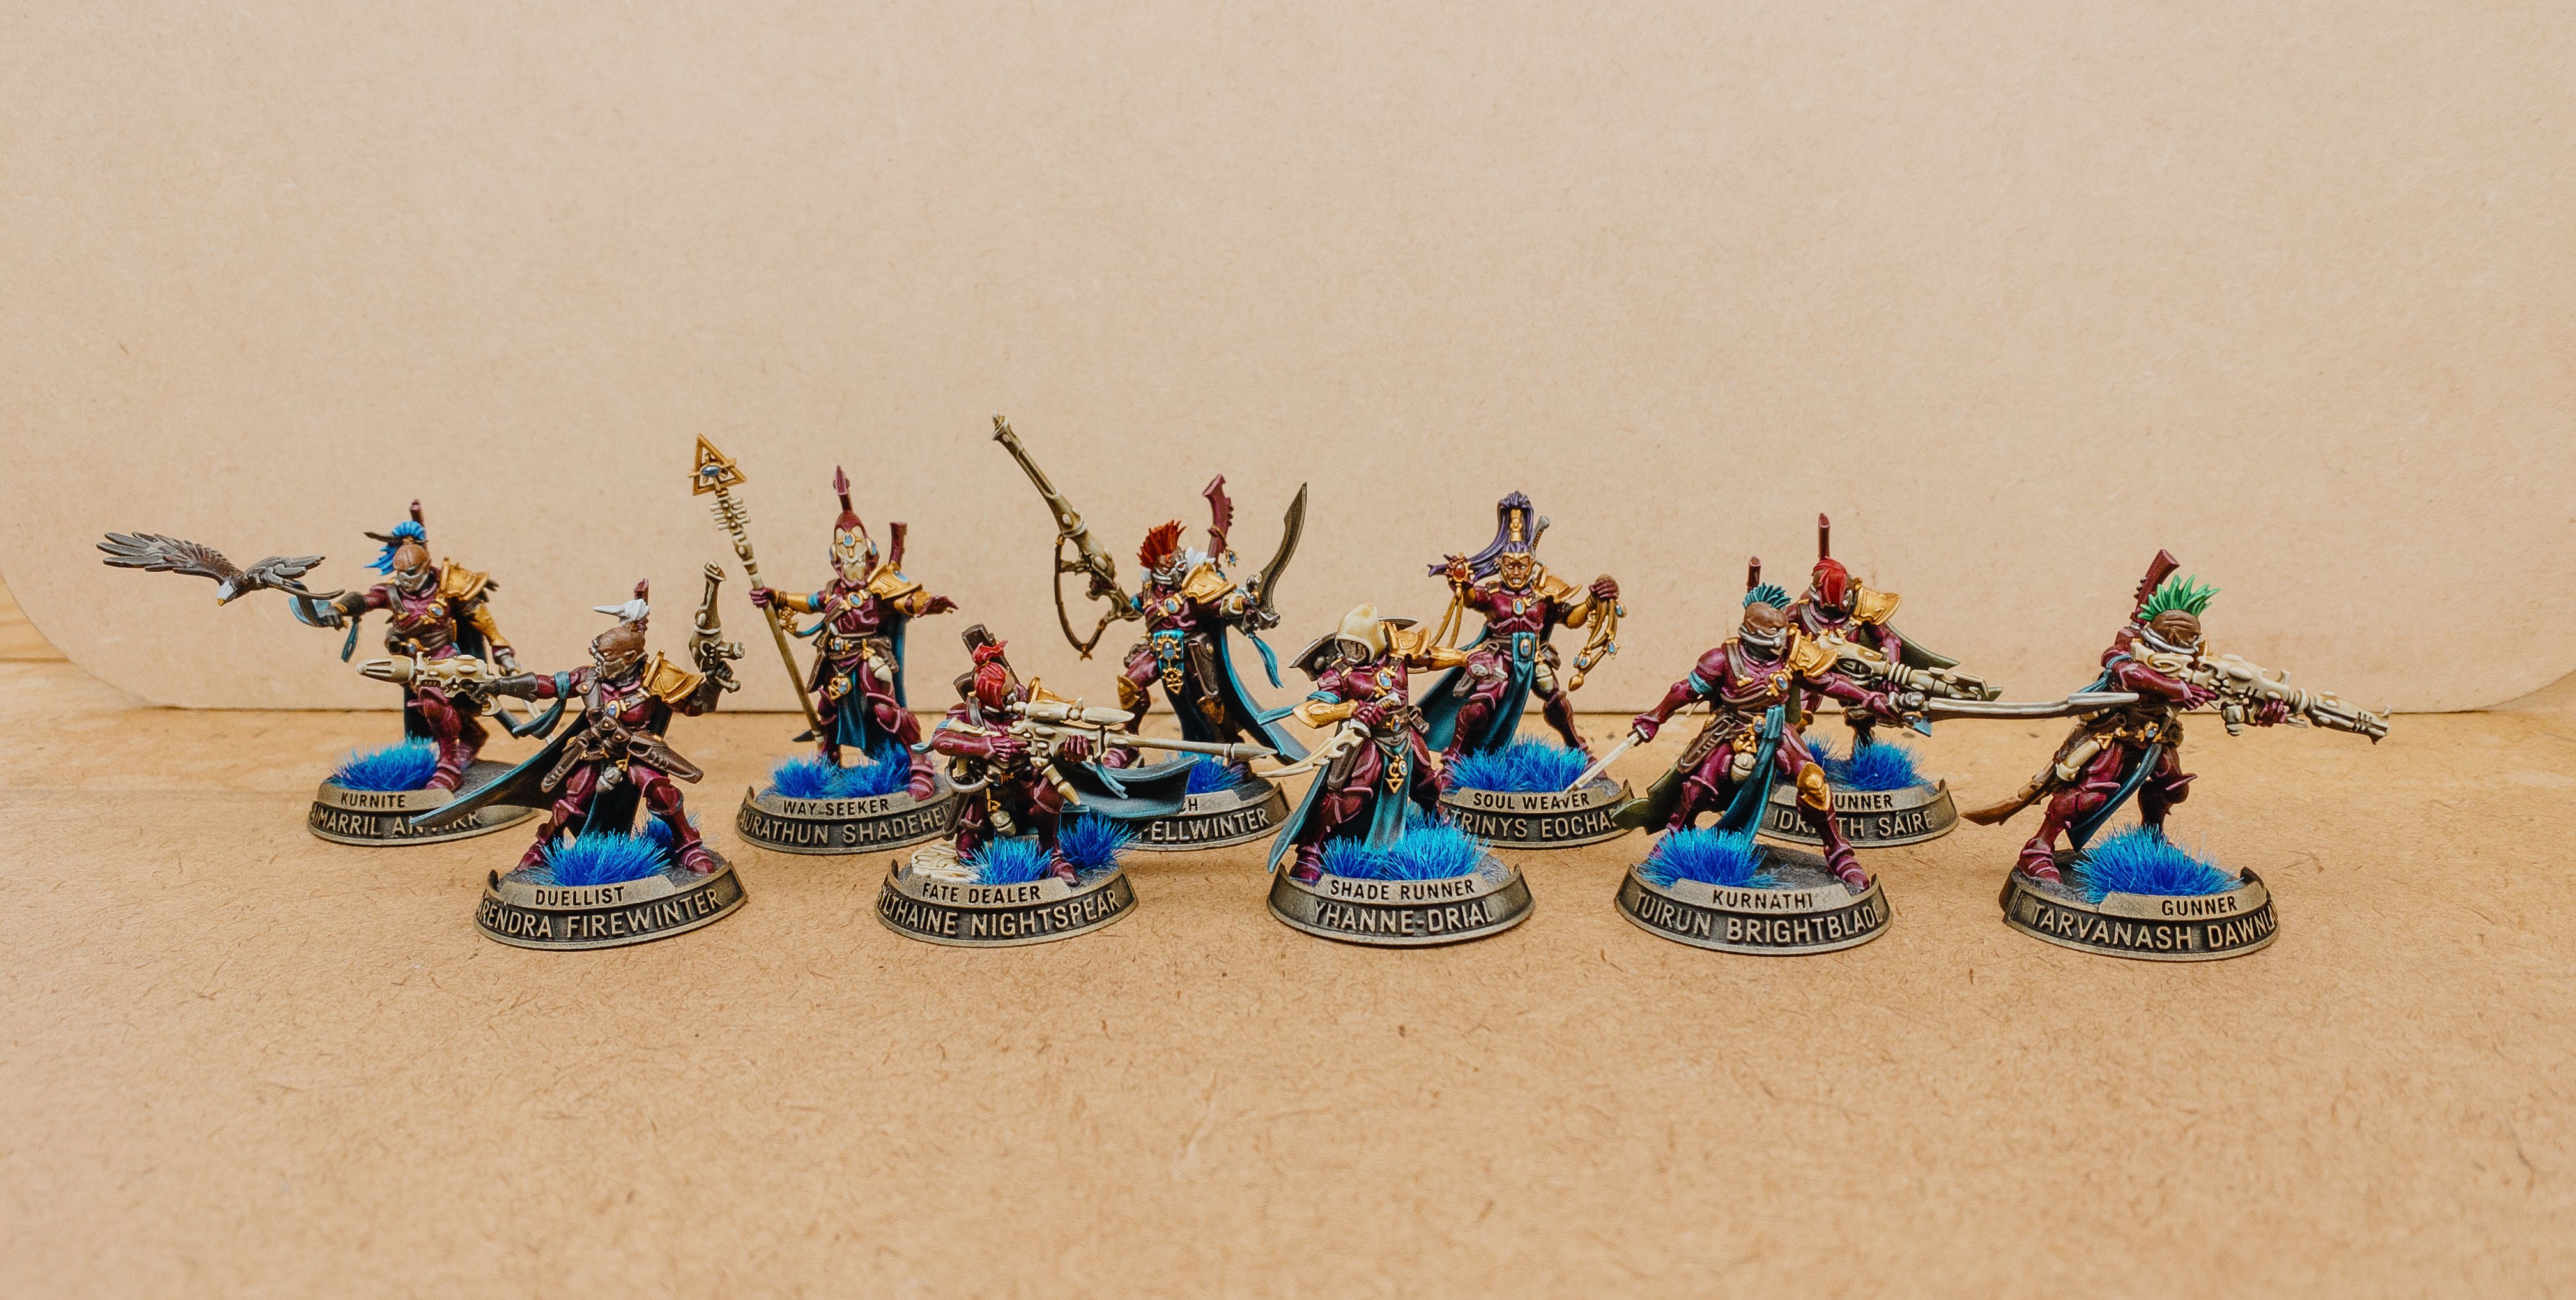 A photo of the ten miniatures that are my Corsair Voidscarred squad. They're essentially space elf pirates, all their armour is elegant and flowing and a rich burgundy colour, and they have cool turquoise capes. They're branding various ranged and close-combat weapons, and several of them have brightly-coloured mohawks. They each have a personalised name plate attached to the front of their bases, with a smaller bit of text on top that gives the unit type ("Fate Dealer", "Soul Weaver", "Way Seeker", and other such cool-sounding things), and a larger piece of text along the bottom that gives the unit's actual name, which are all sort-of Celtic feeling.